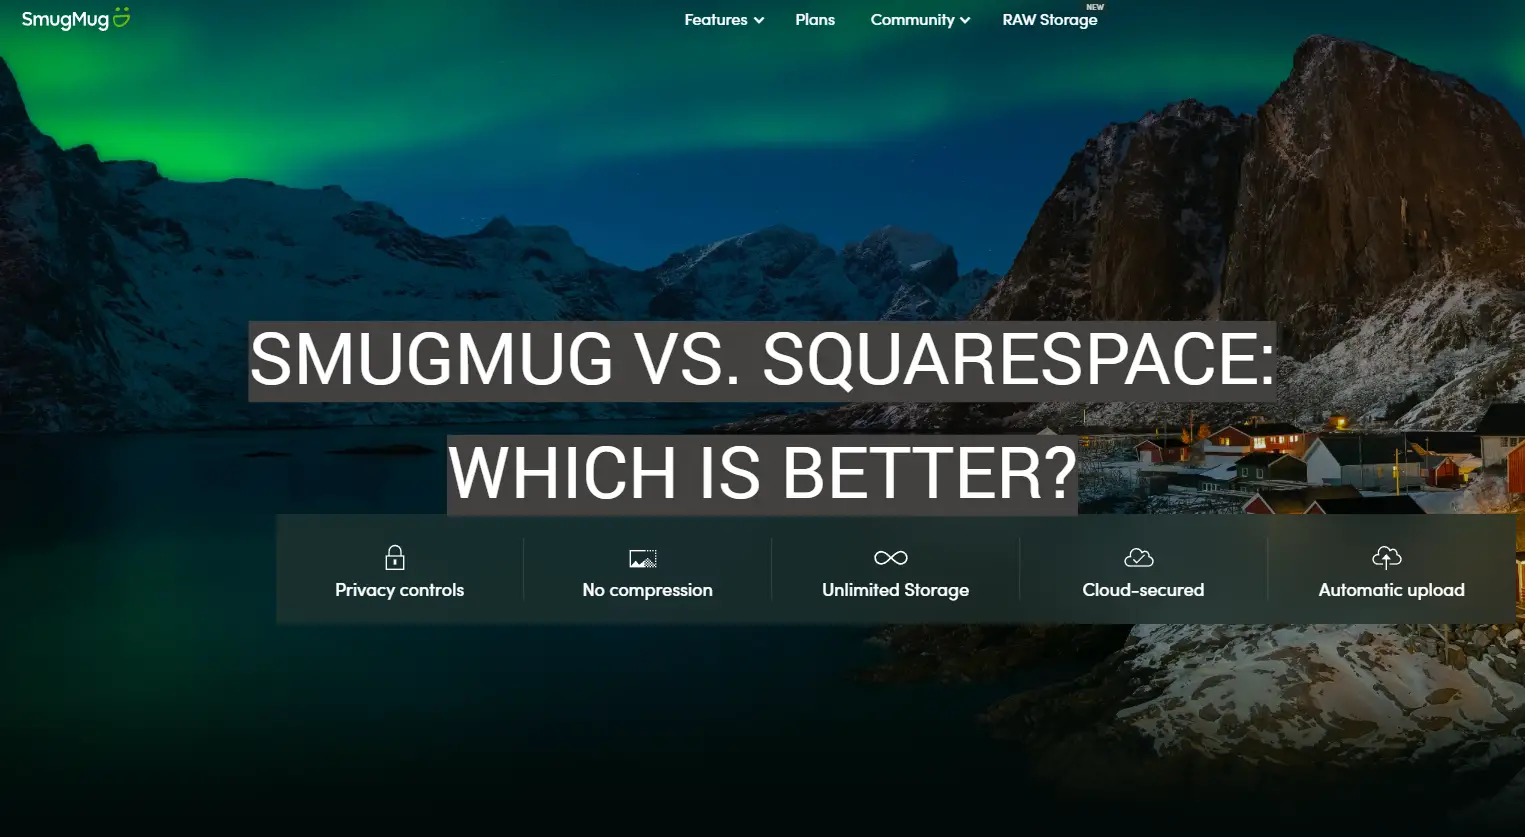 SmugMug vs. Squarespace: Which is Better?